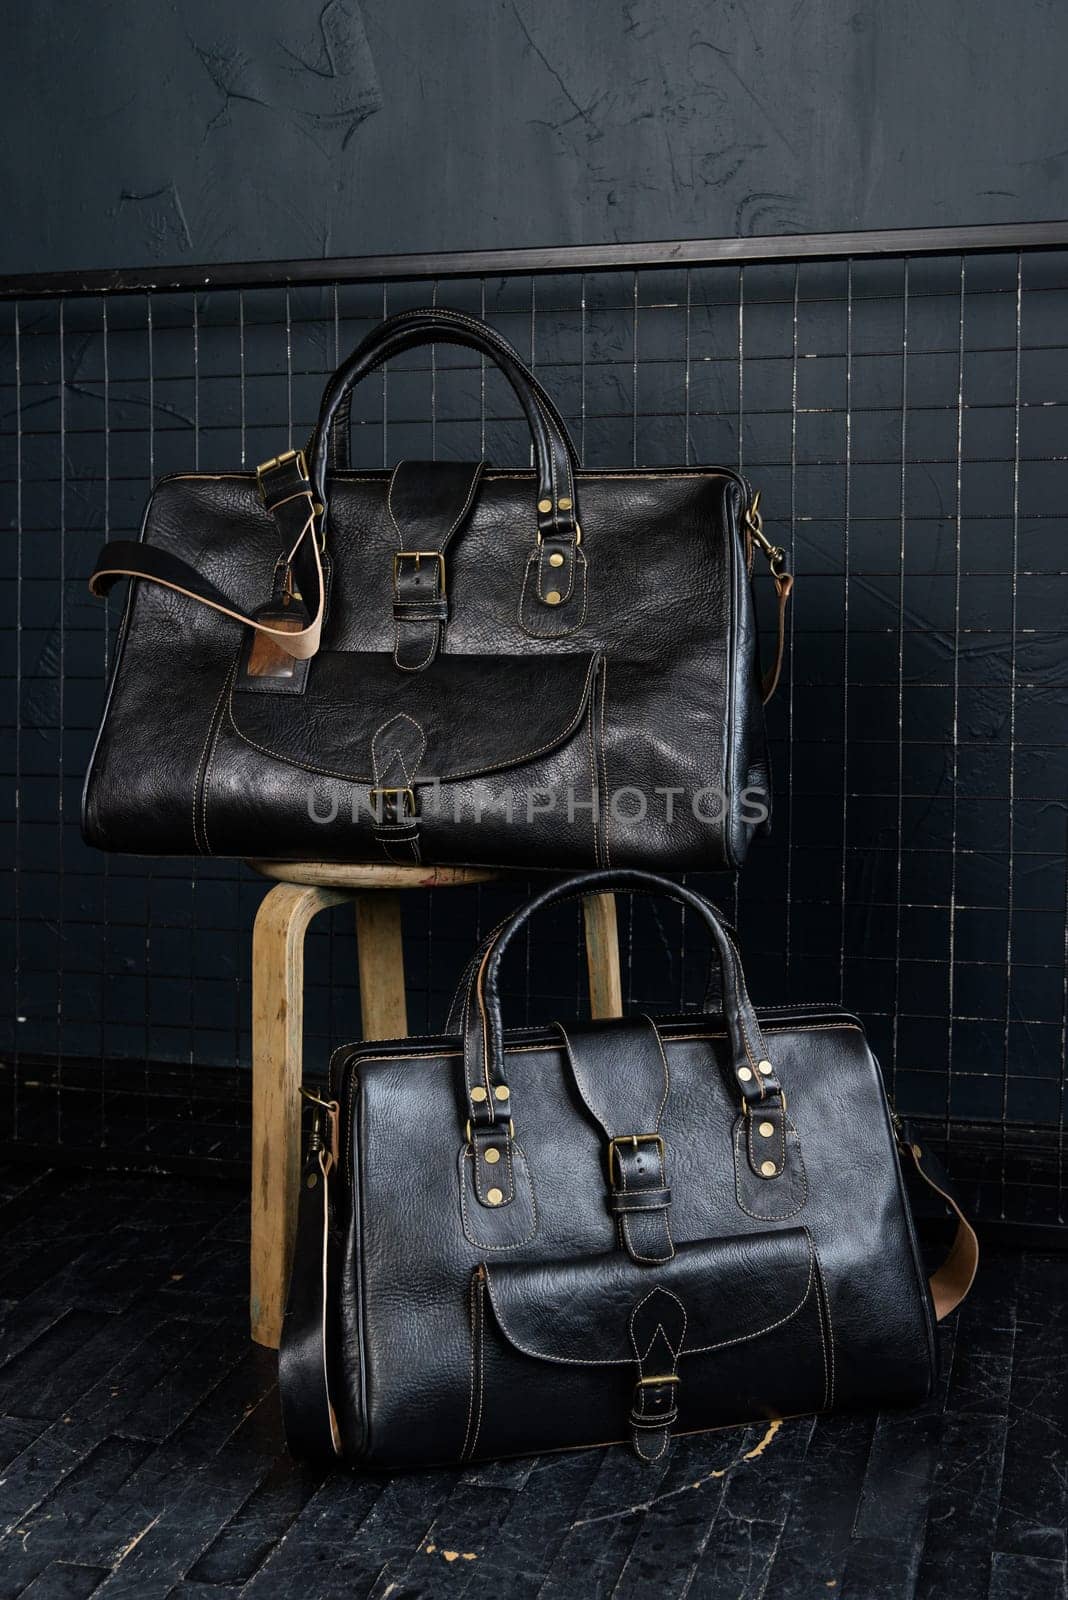 black leather travel bags indoors photo on black background by Ashtray25